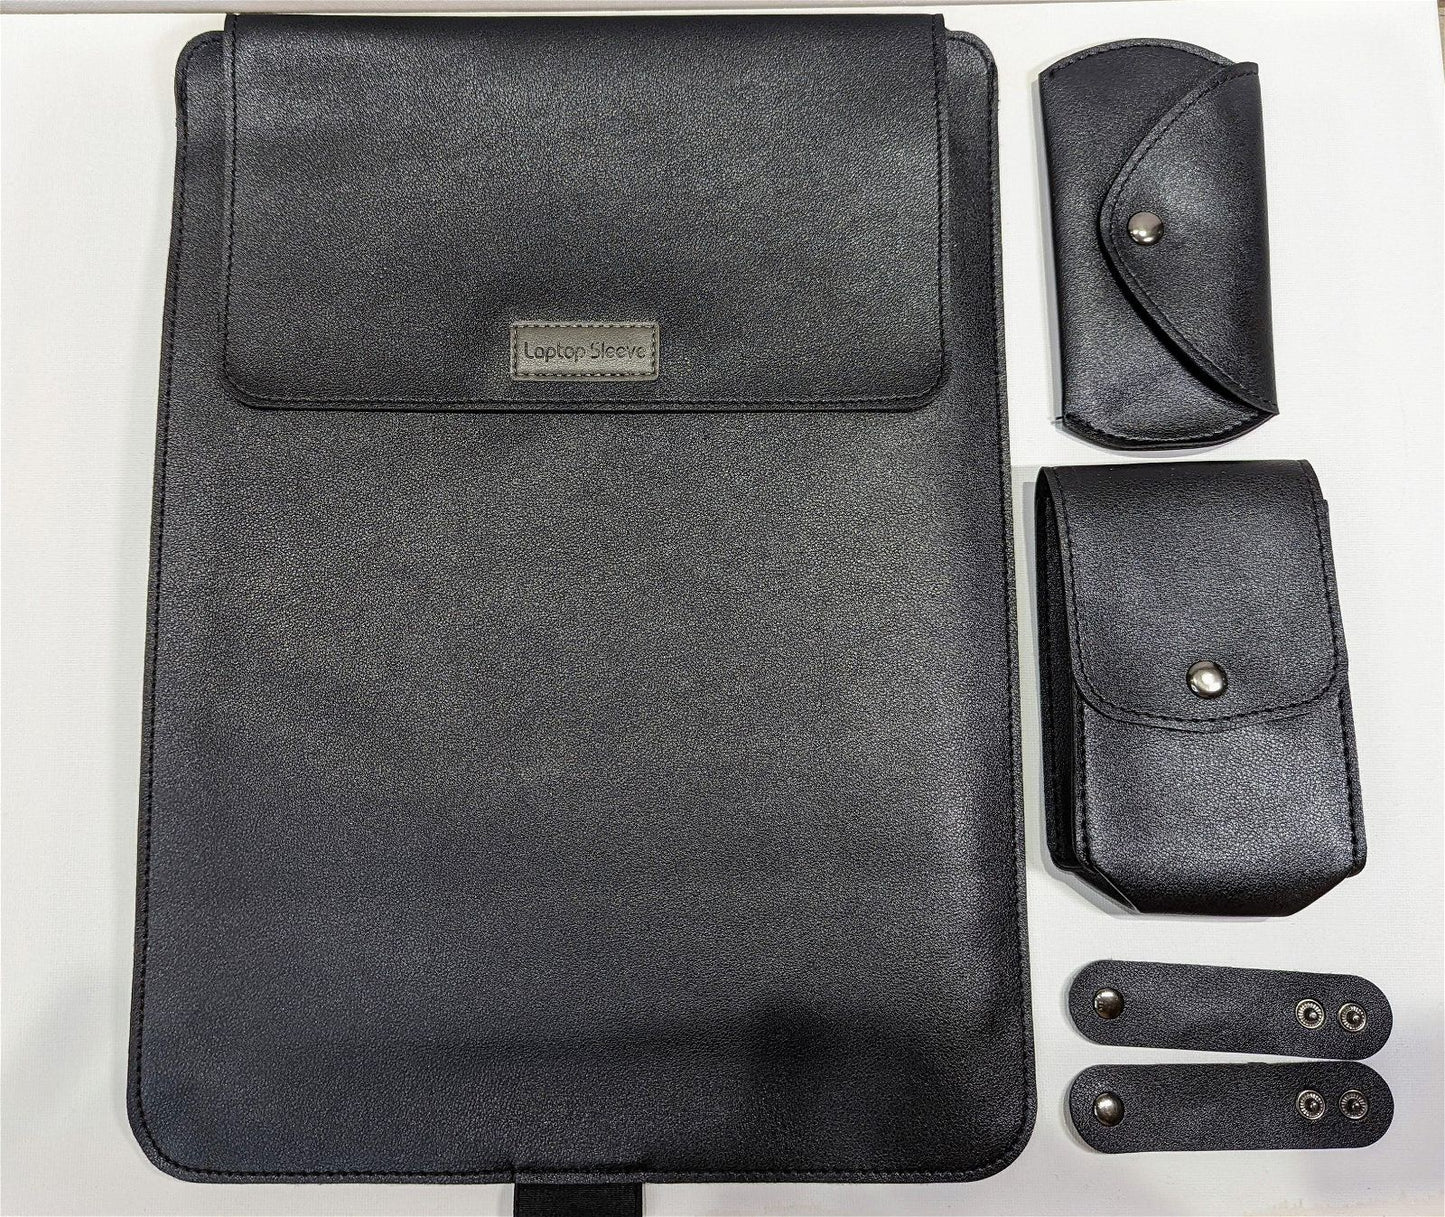 Laptop Sleeve set - Maily's Classic Accessories